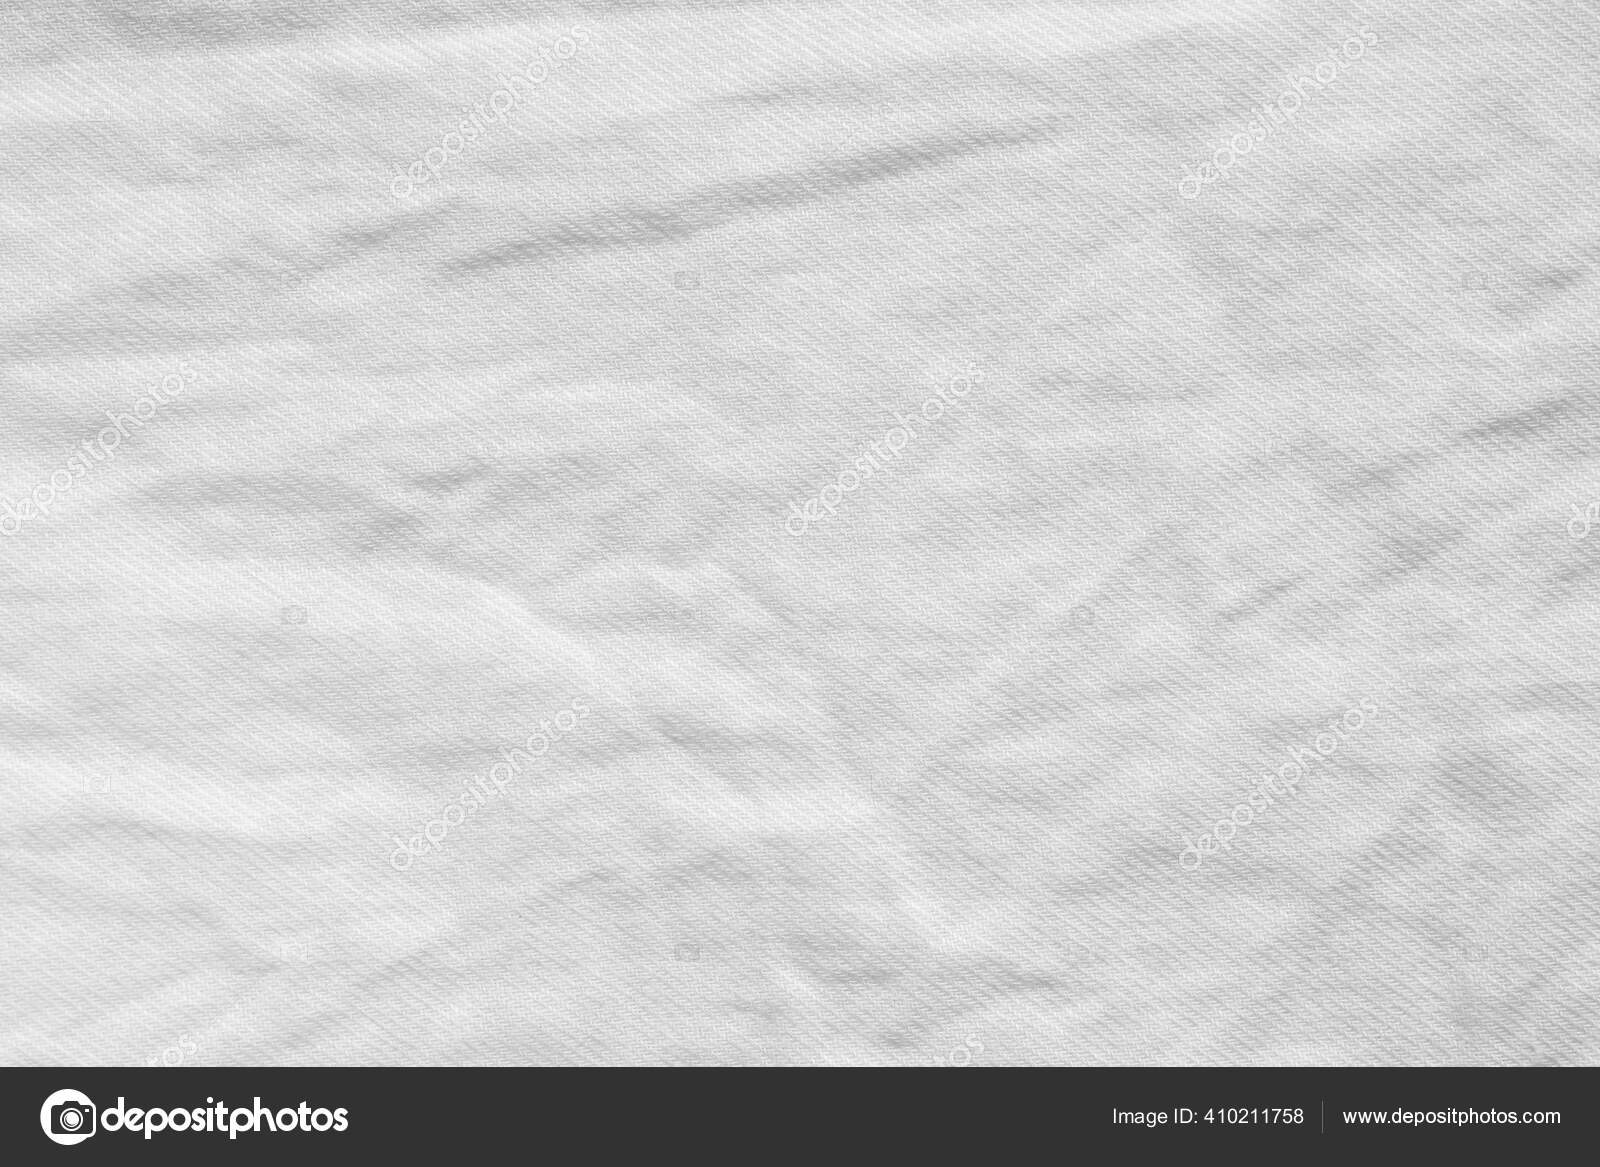 Crumpled White Cotton Fabric Fabric For Sewing Clothes And Shirts Stock  Photo - Download Image Now - iStock